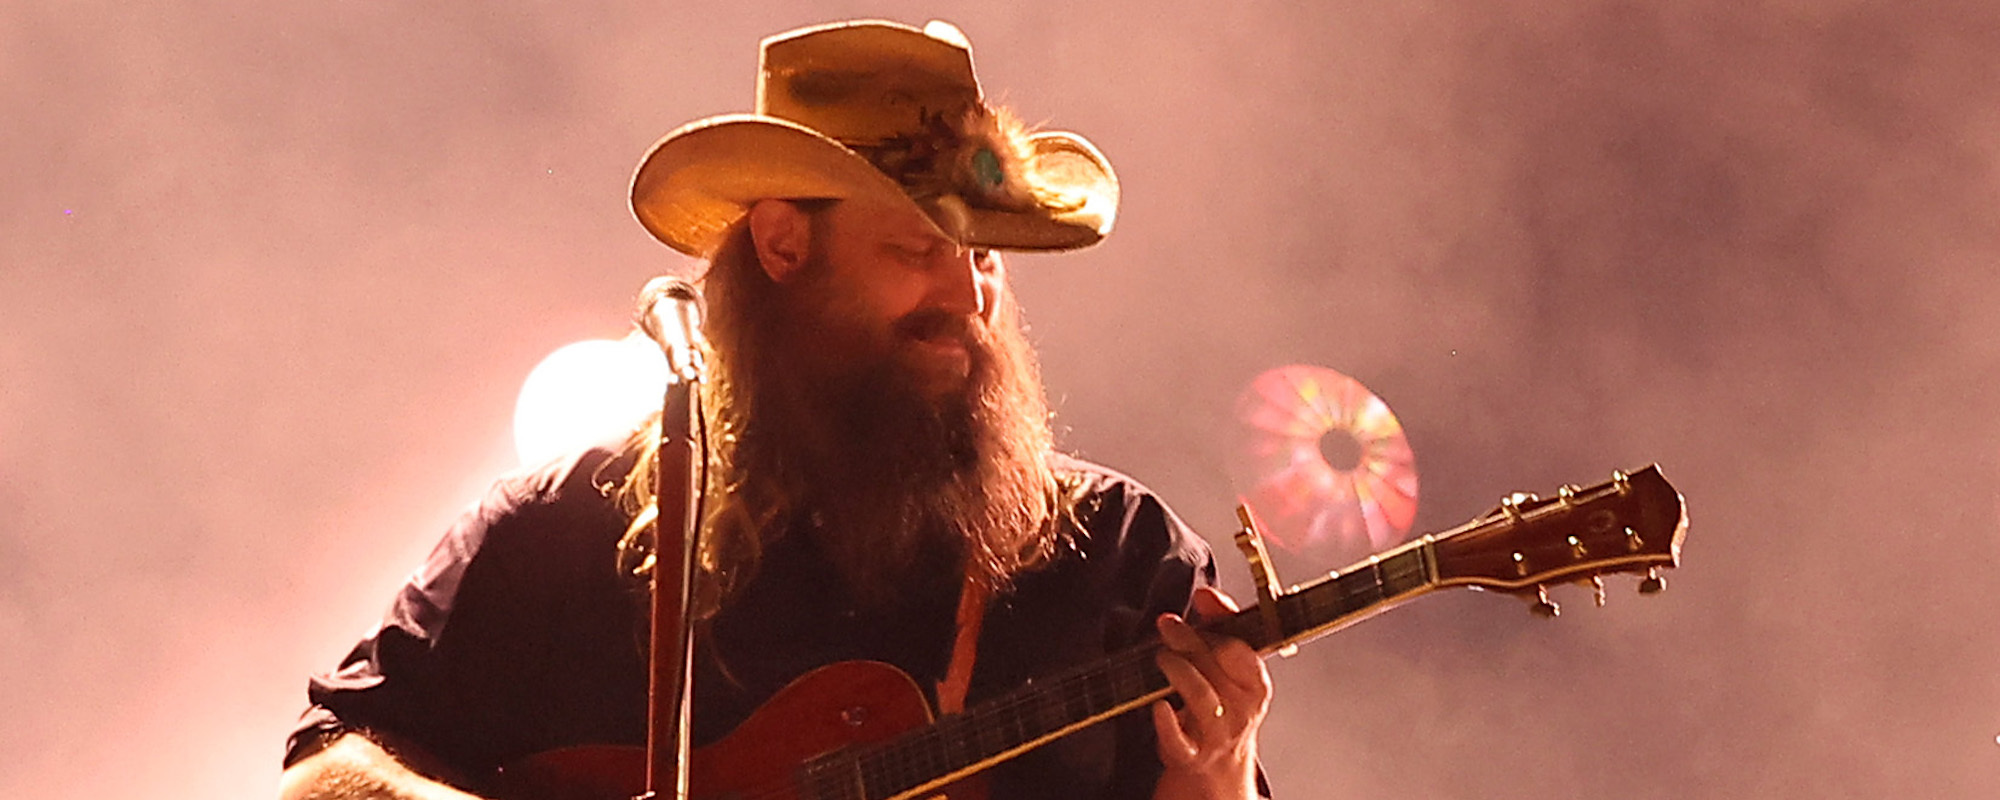 Fear of Commitment and the Healing Meaning Behind Chris Stapleton’s ‘Traveller’ Track “Fire Away”